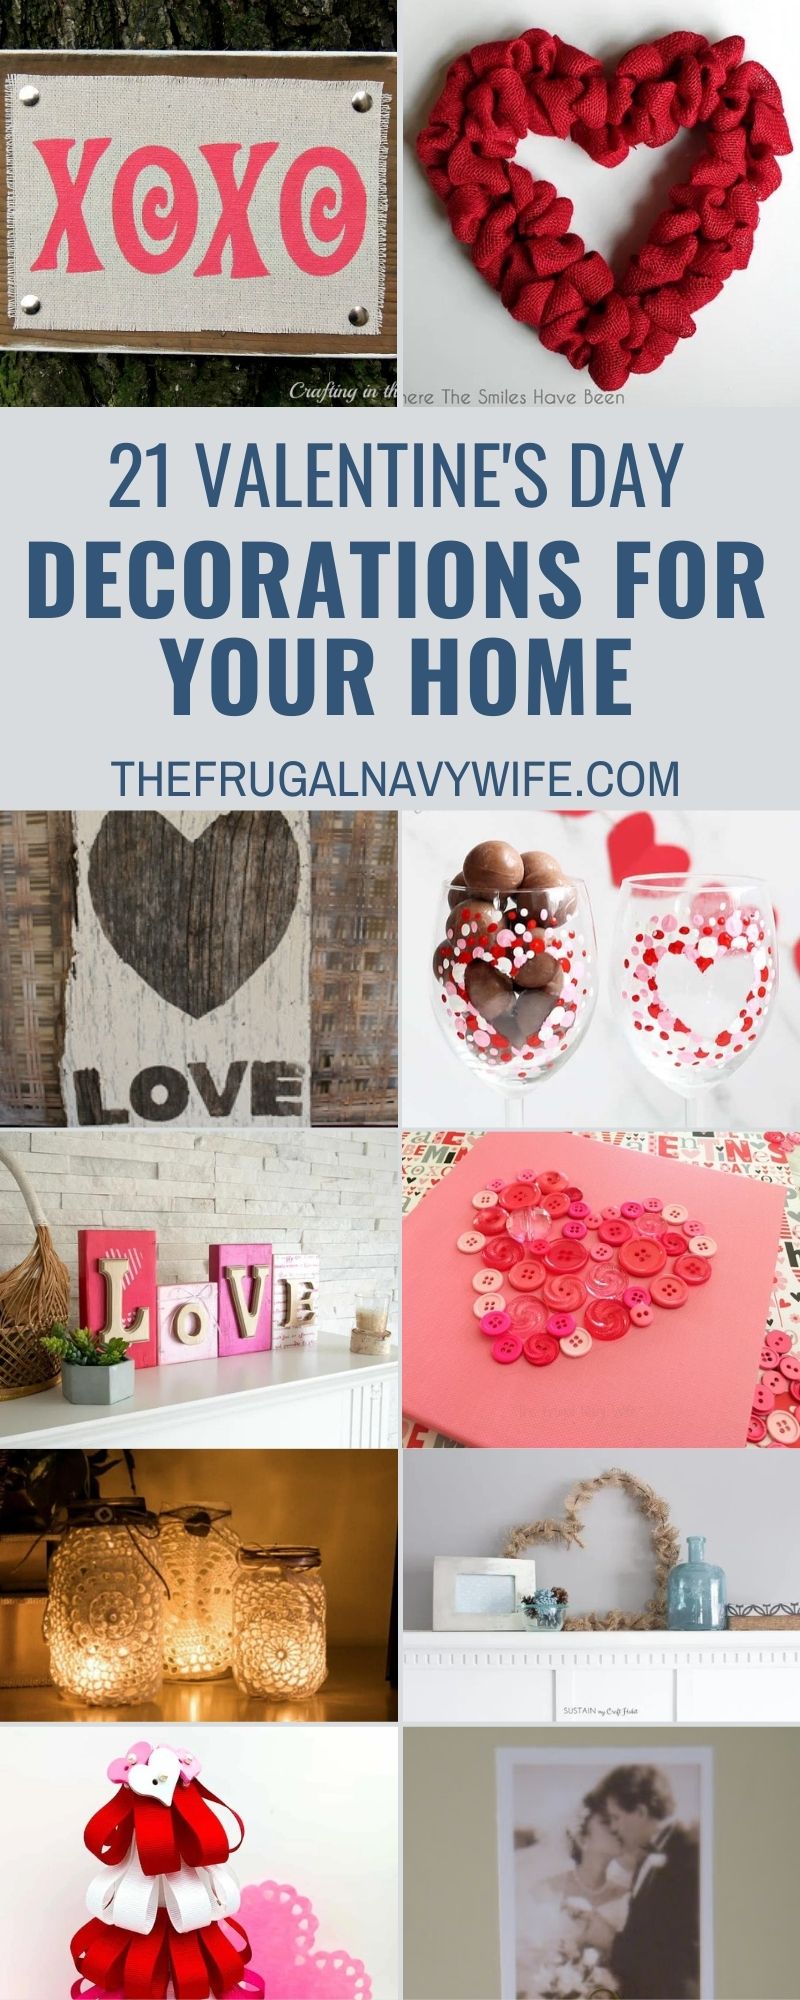 Valentine's Day Decorations for your home